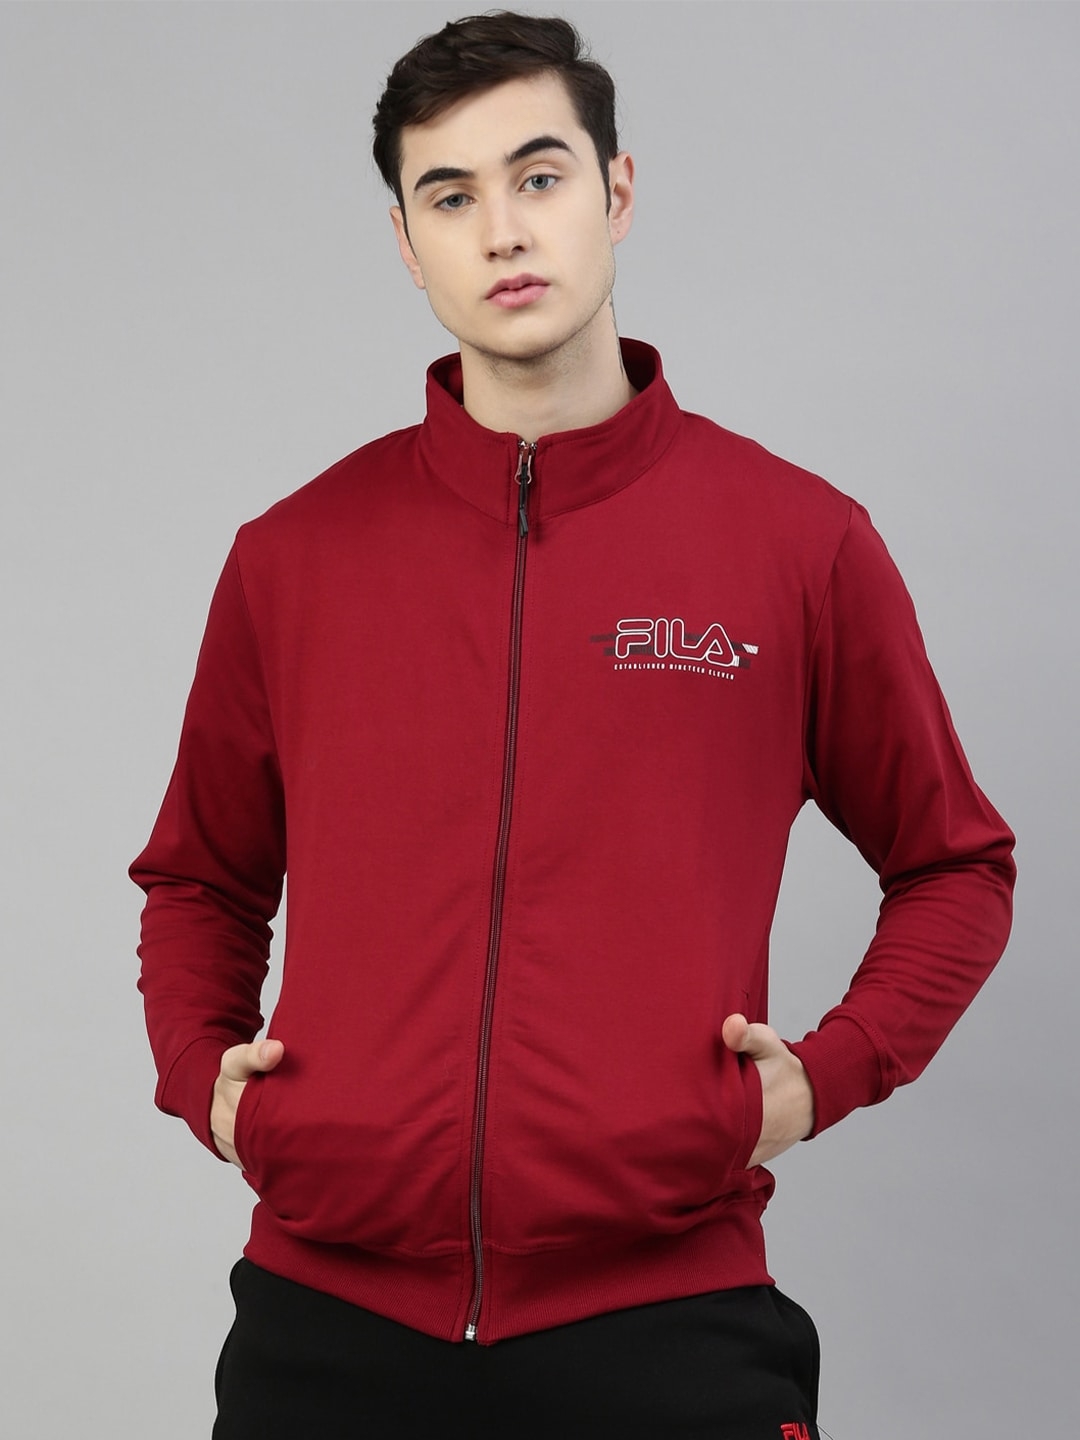 Men's Red Cotton Activewear Jackets